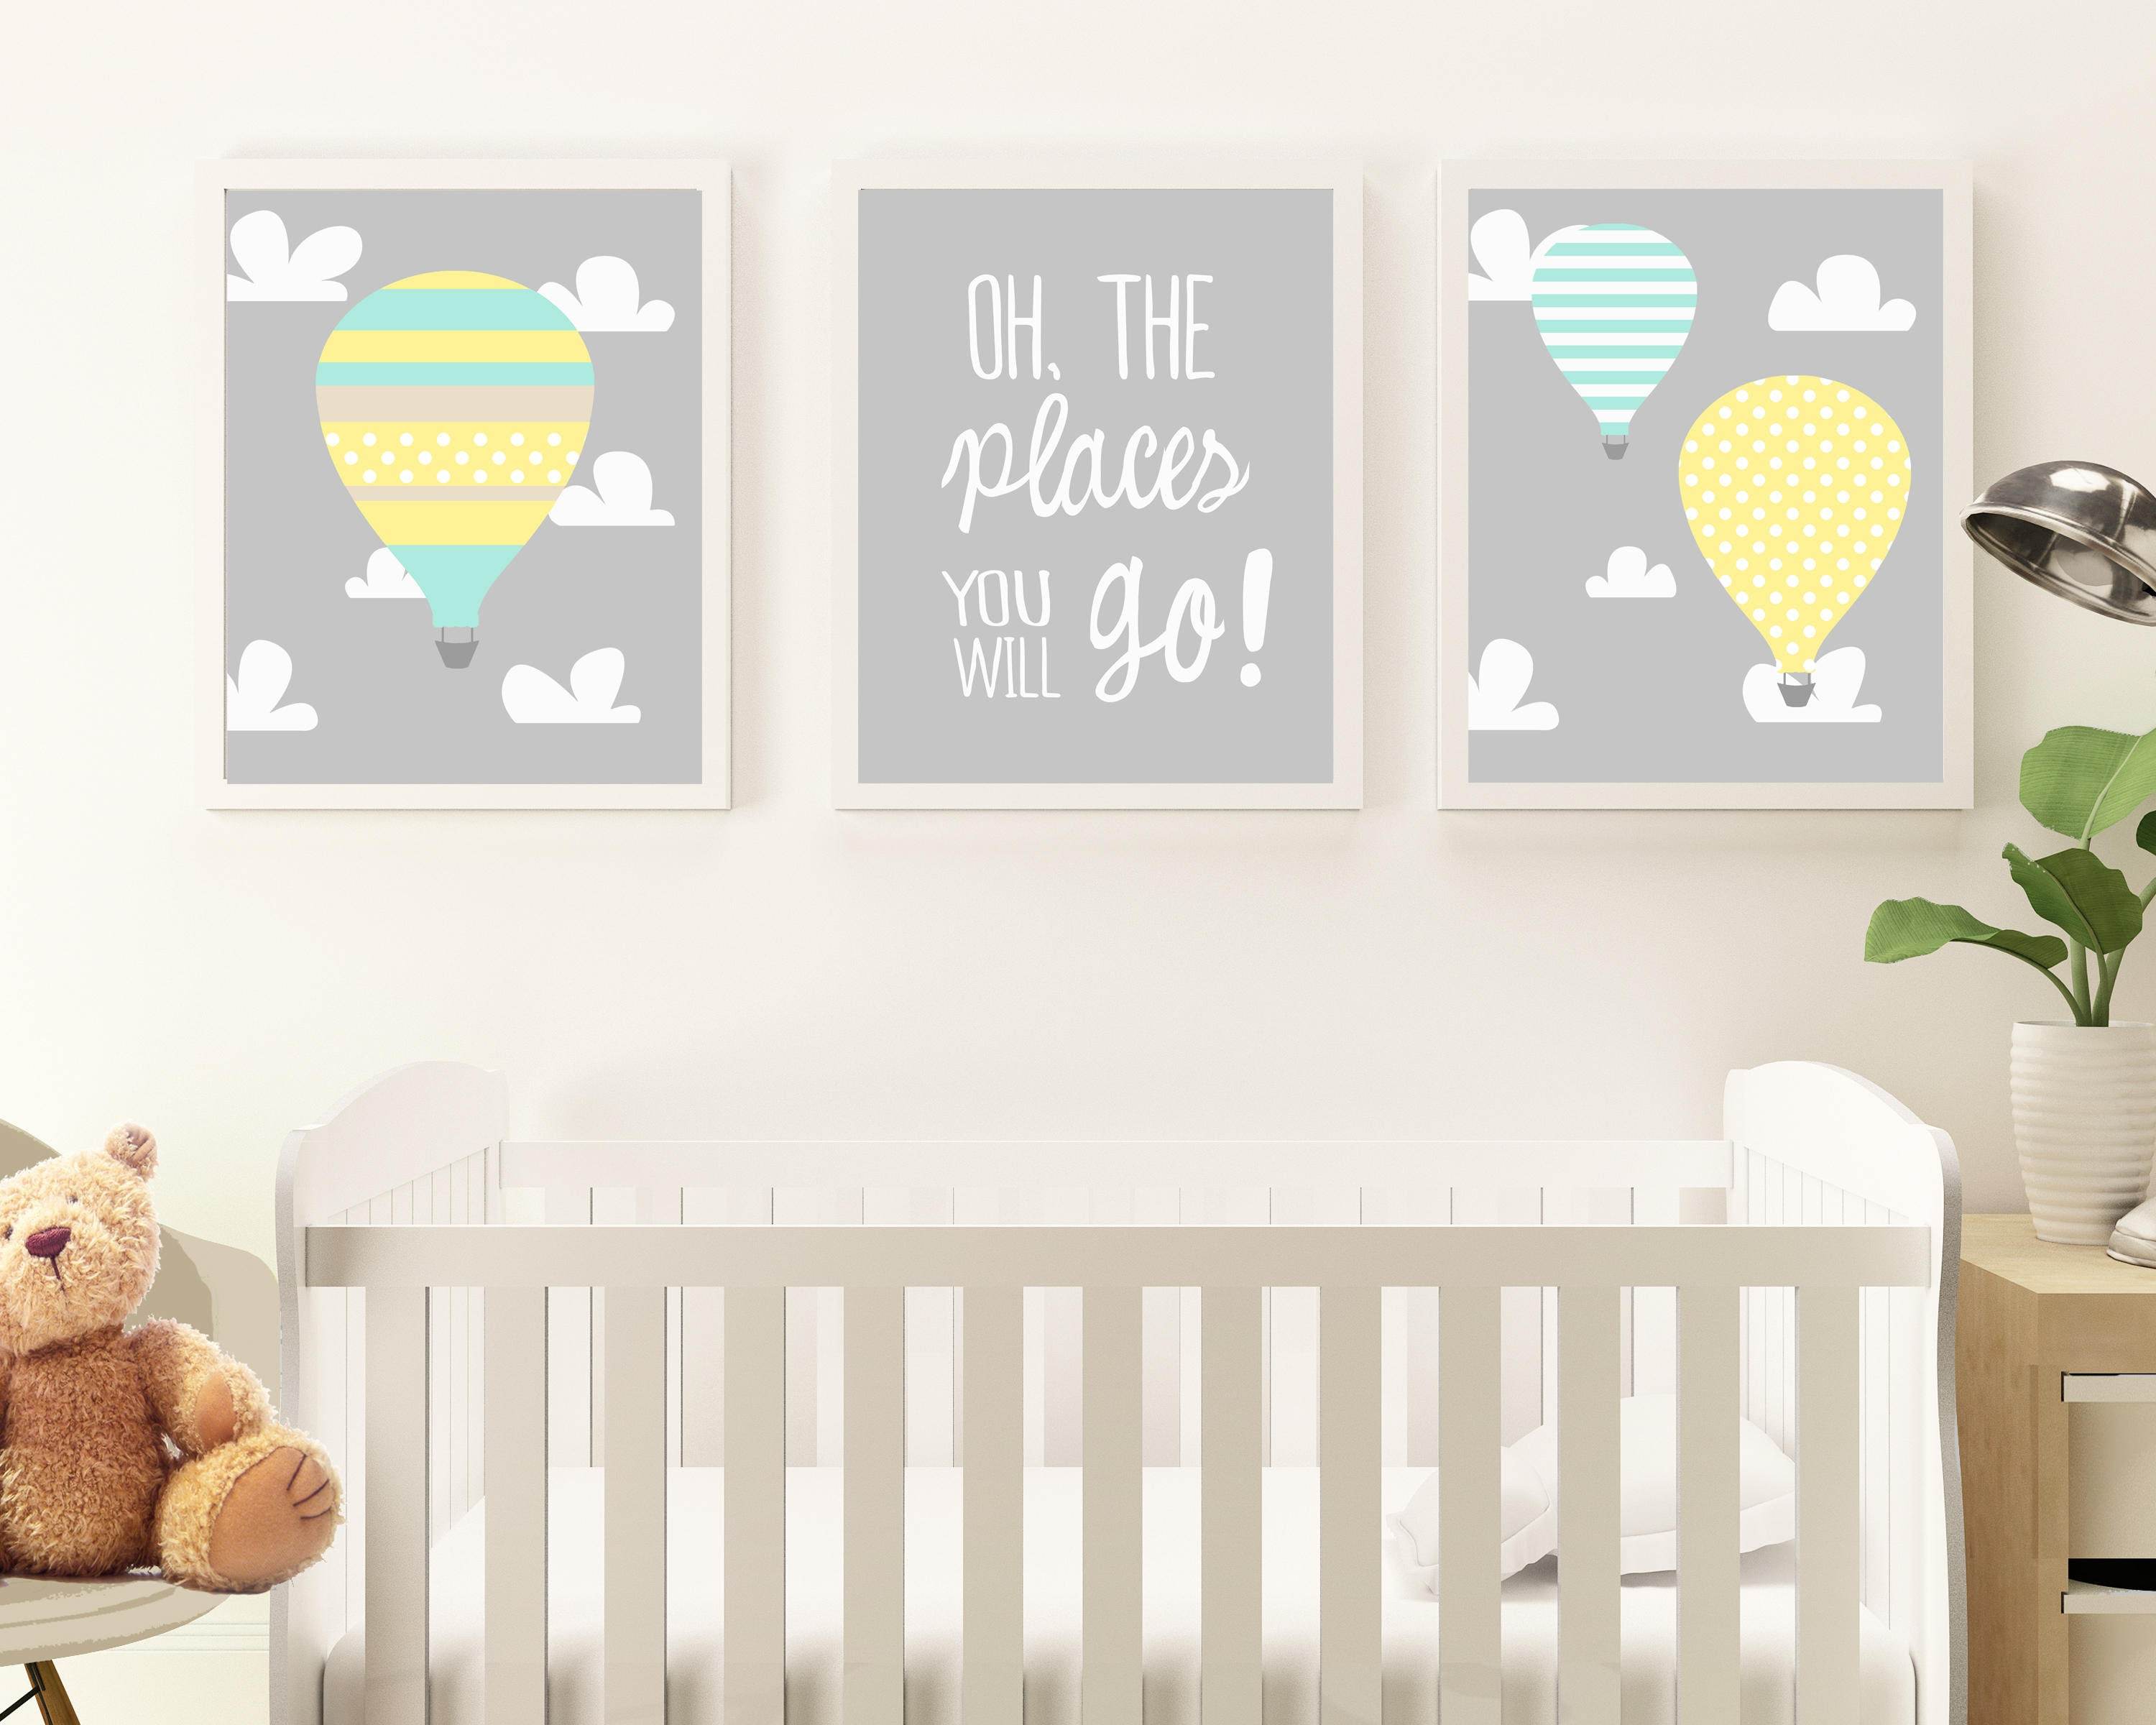 Baby hot air balloon wall art, Blue Mint, Yellow Nursery decor, Oh the places you will go Baby room art prints, Hot air balloon nursery H585 nursery art print baby nursery bedroom decor